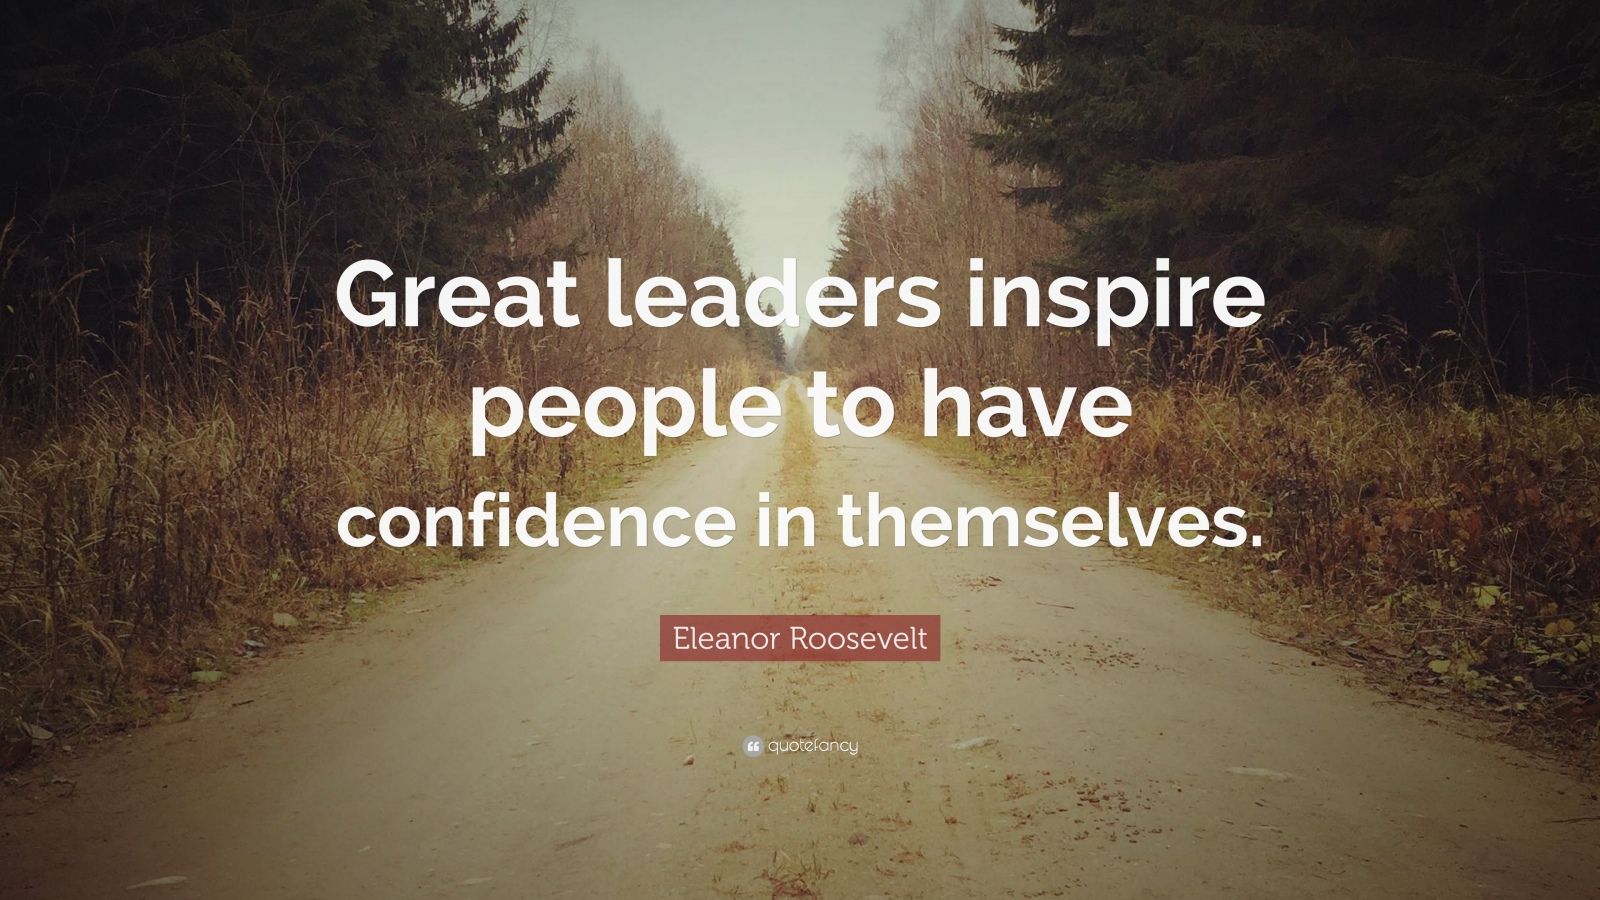 Eleanor Roosevelt Quote “Great leaders inspire people to have confidence in themselves ”